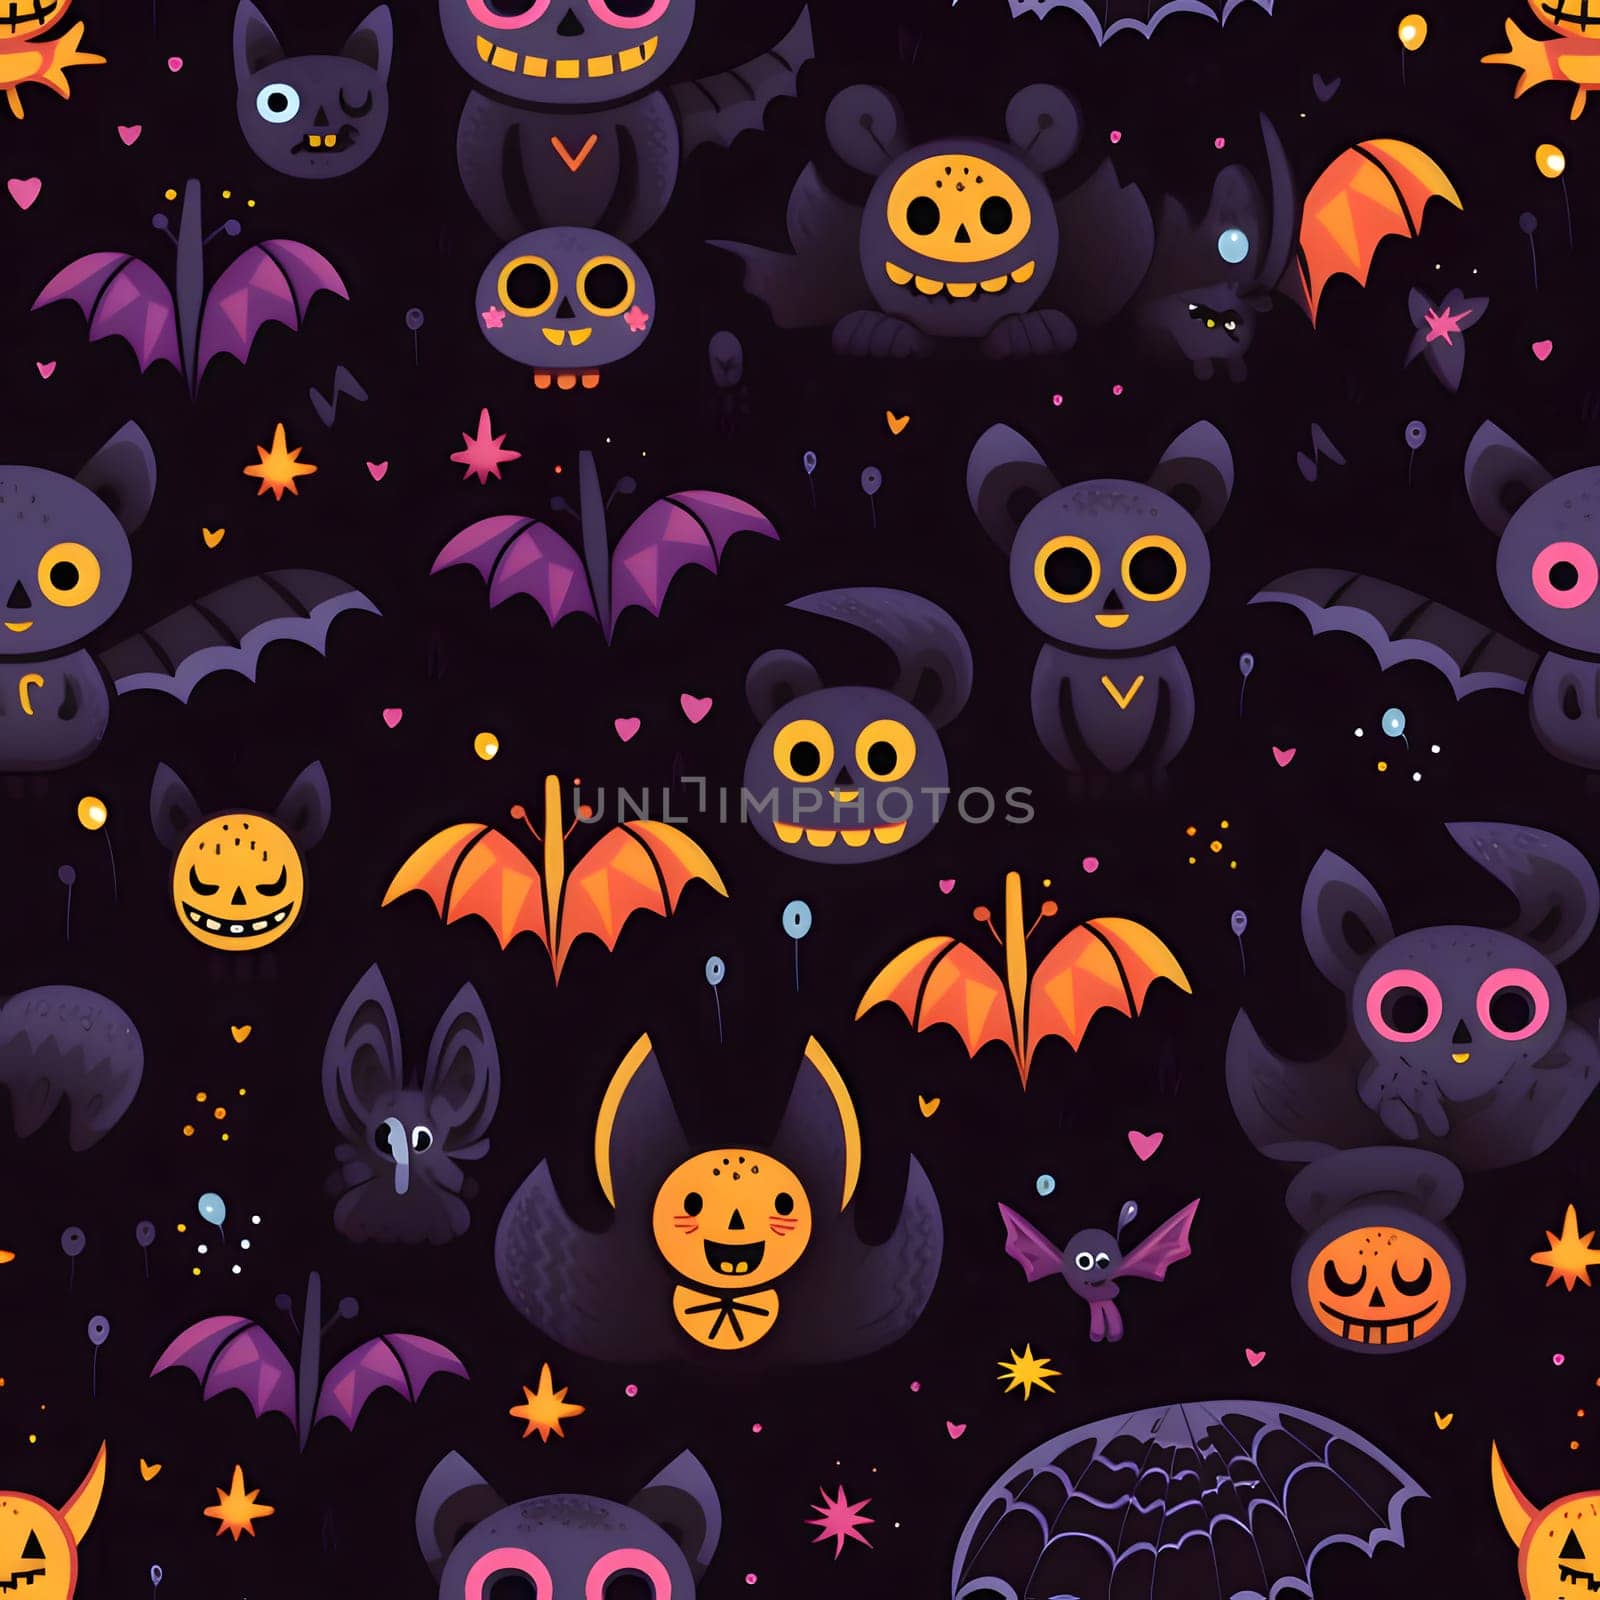 Patterns and banners backgrounds: Halloween seamless pattern with bats, spiders and pumpkins. Vector illustration.